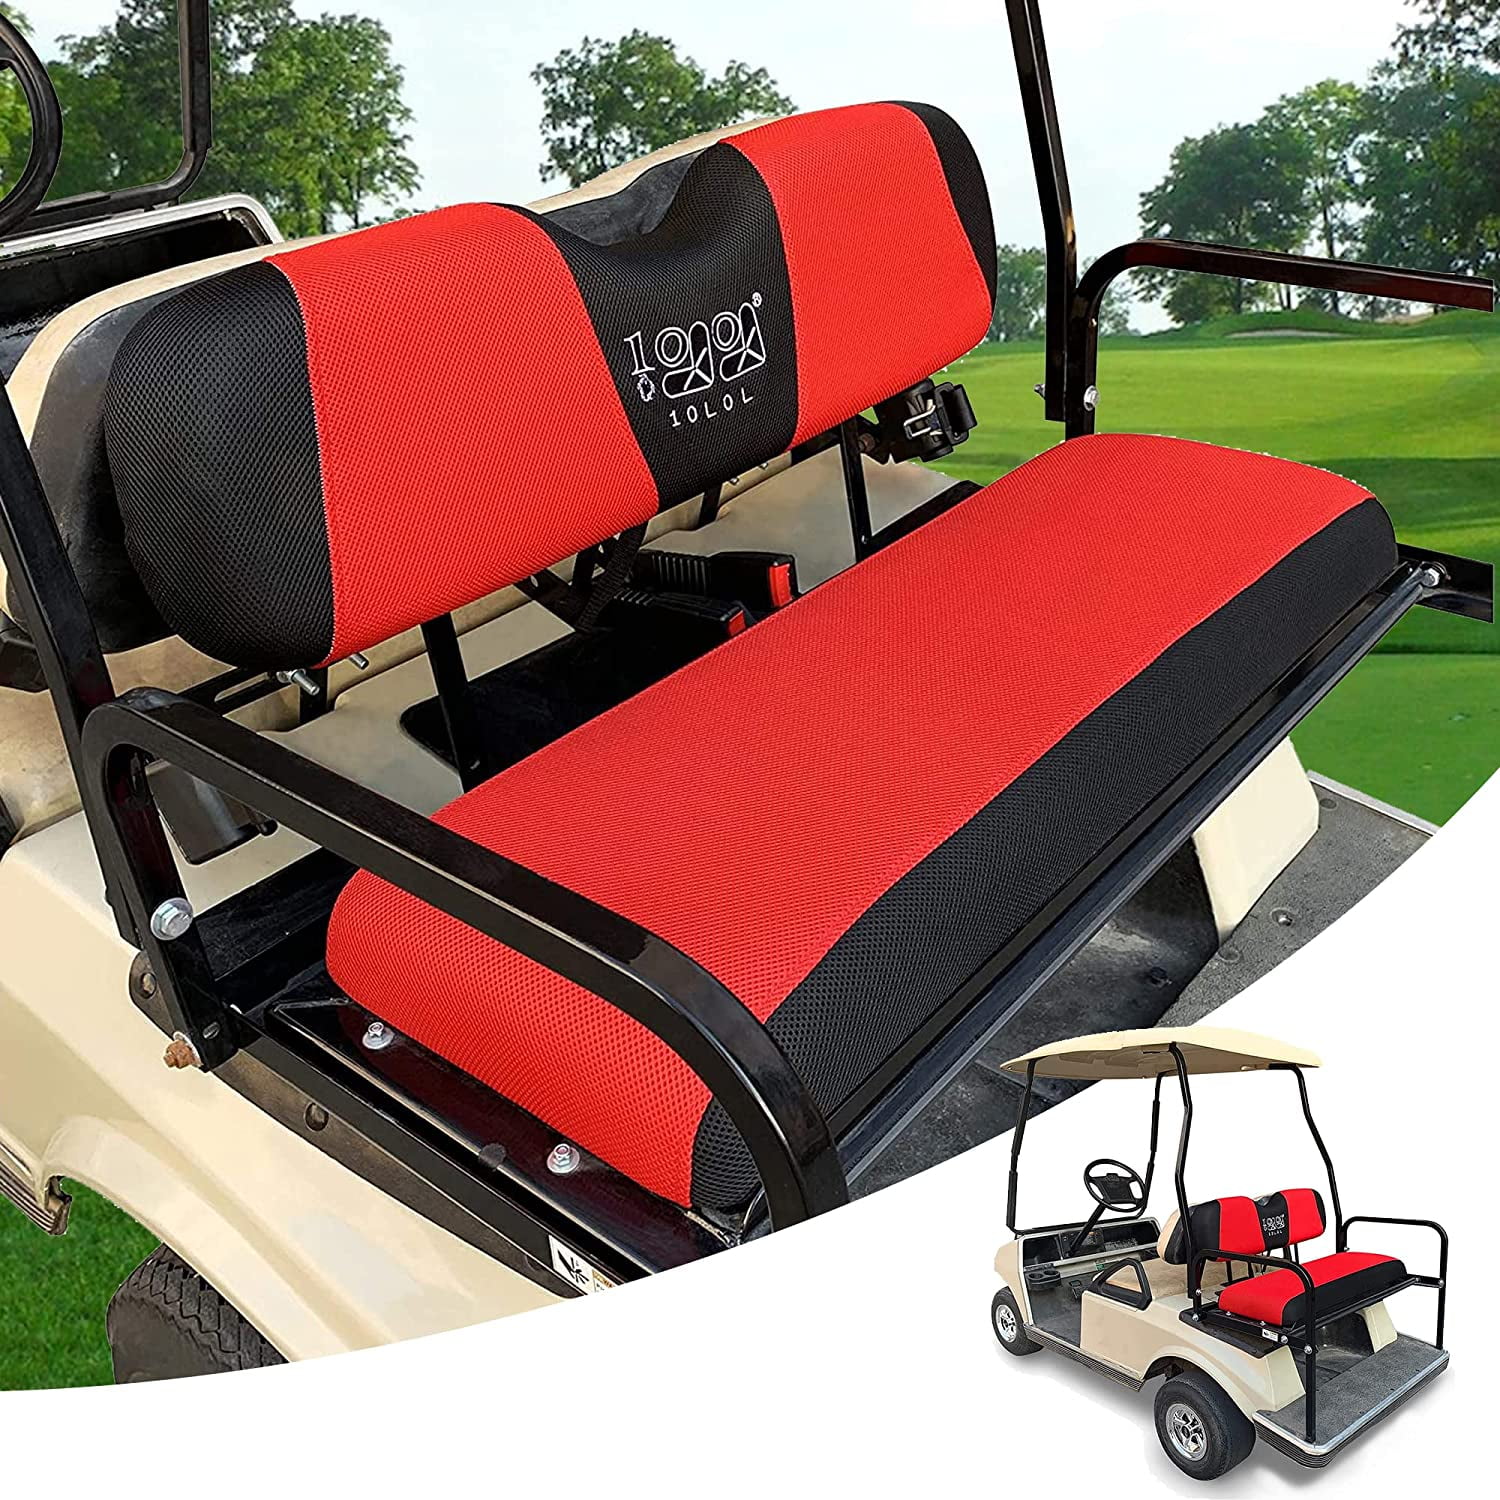  XUANYUDG0769 Golf Cart Seat Covers for EZGO TXT/RXV/Club Car  DS/Precedent/Yamaha Rear Seat Cushion, Vinyl Leather Made/Adjustable Straps  and Retractable Buckle/No Stapler Required - Black : Sports & Outdoors